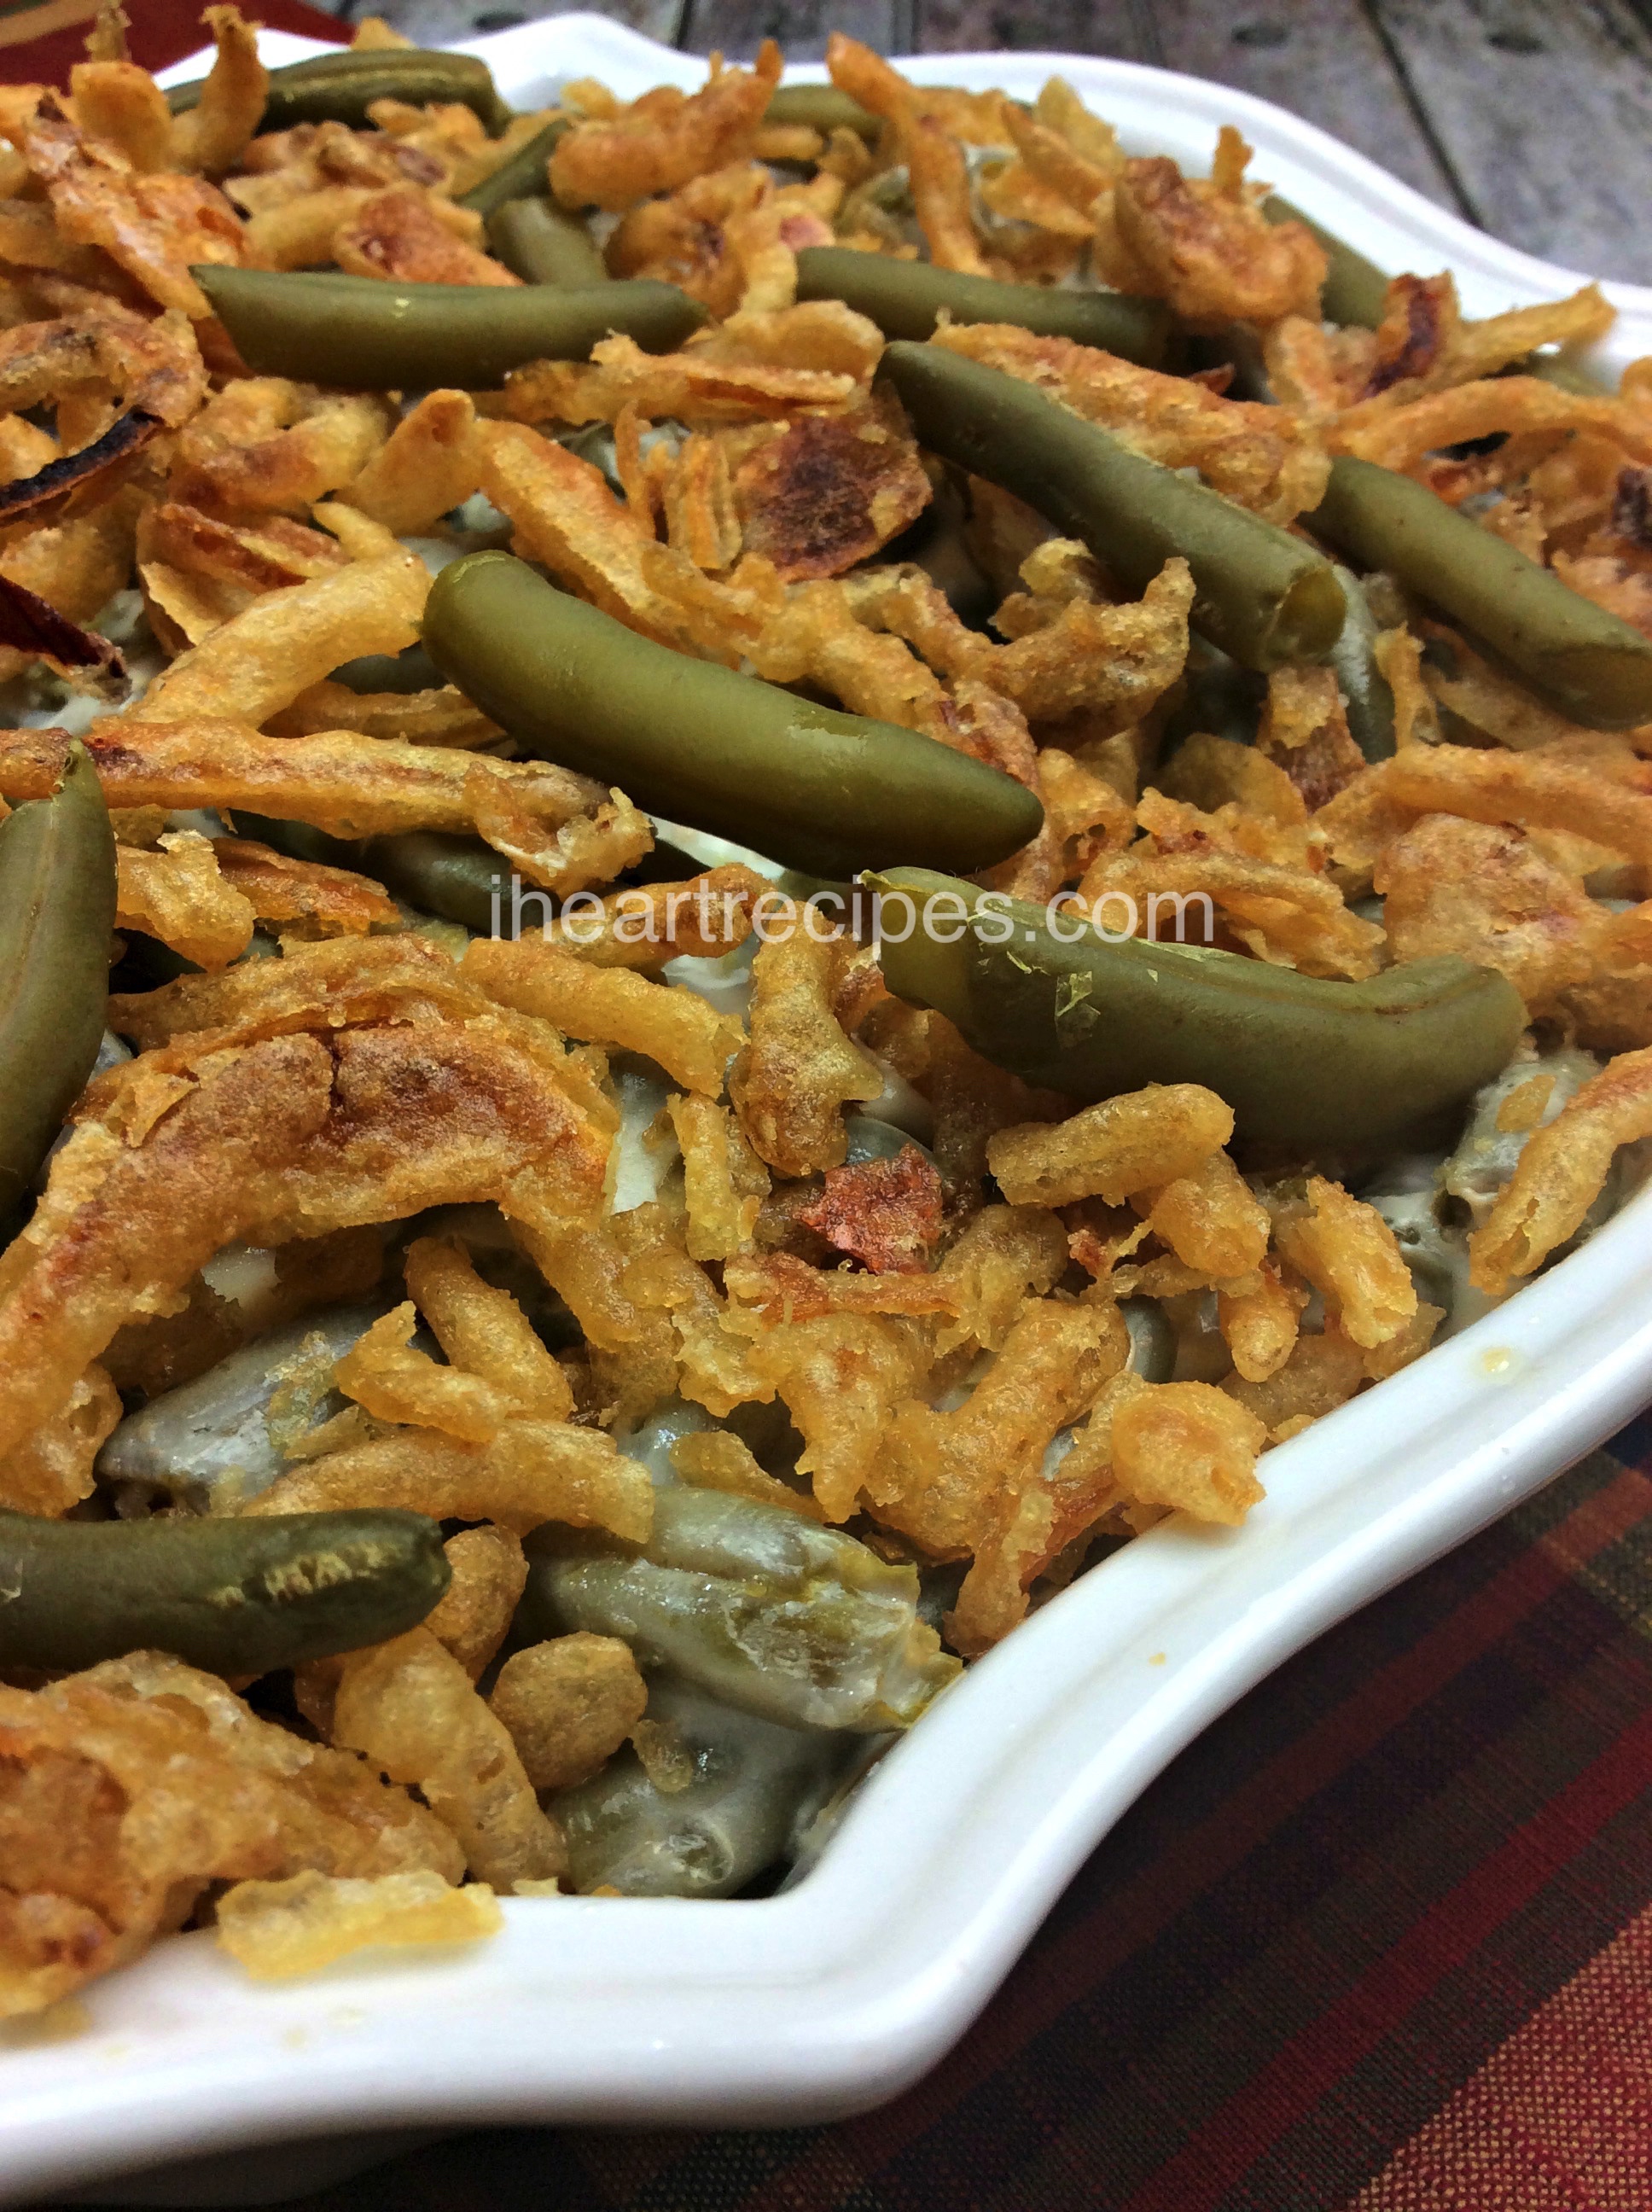 Crisp french fried onions top this creamy, classic green bean casserole served in a white serving dish.